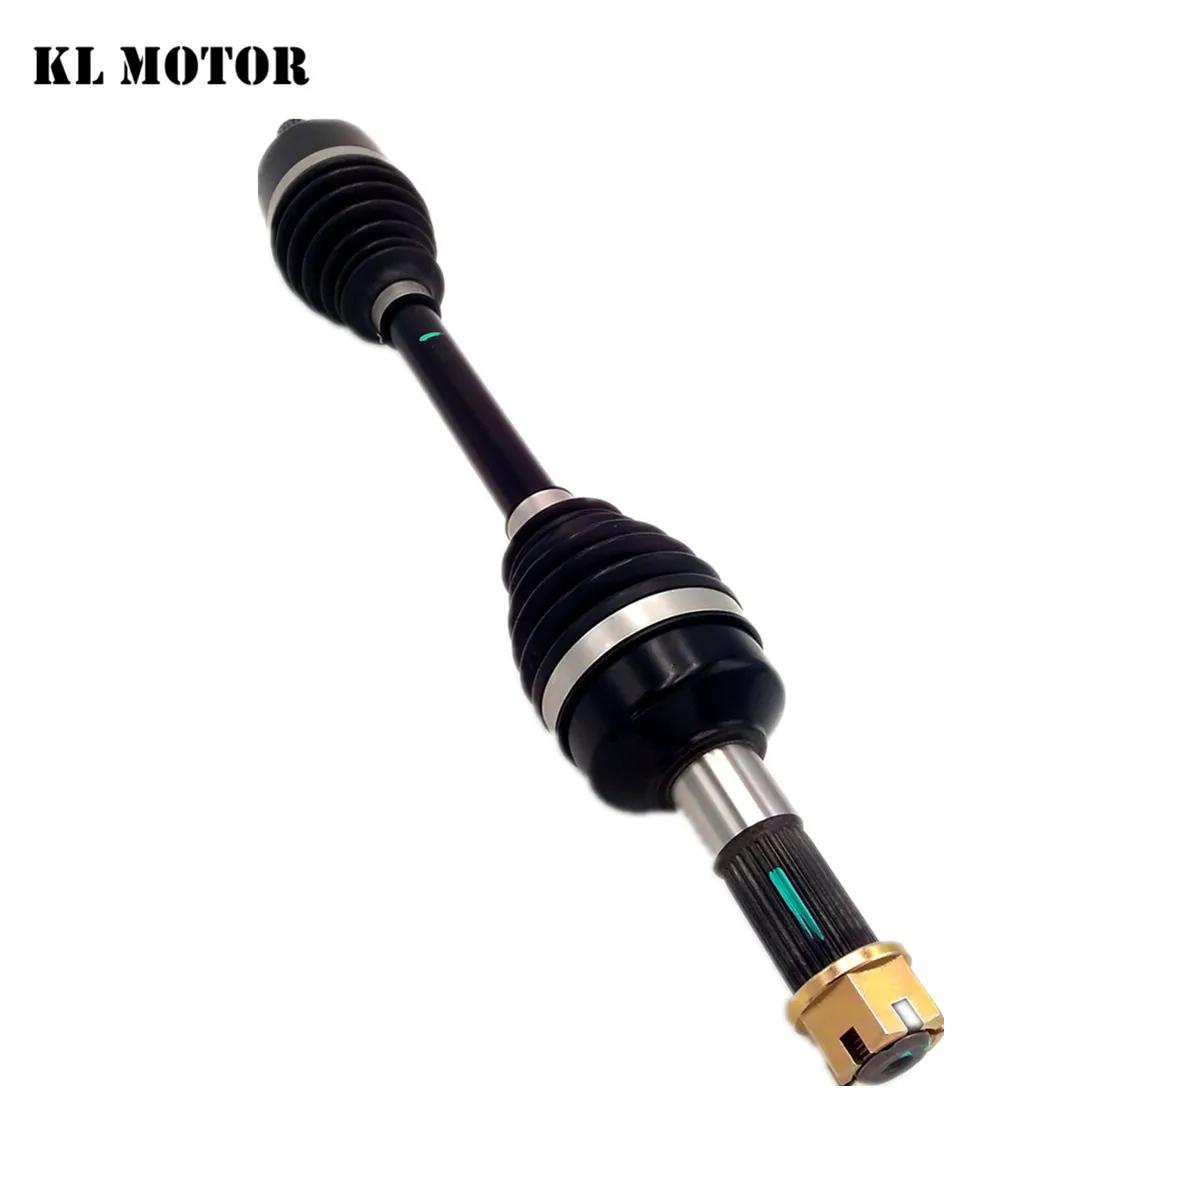 Front Right Drive Shaft Drive Axle Assy for cf500 X5 500 800 x5 x8 ATV GOES 9010-270200-1000 ATV Accessories QUAD GO KART